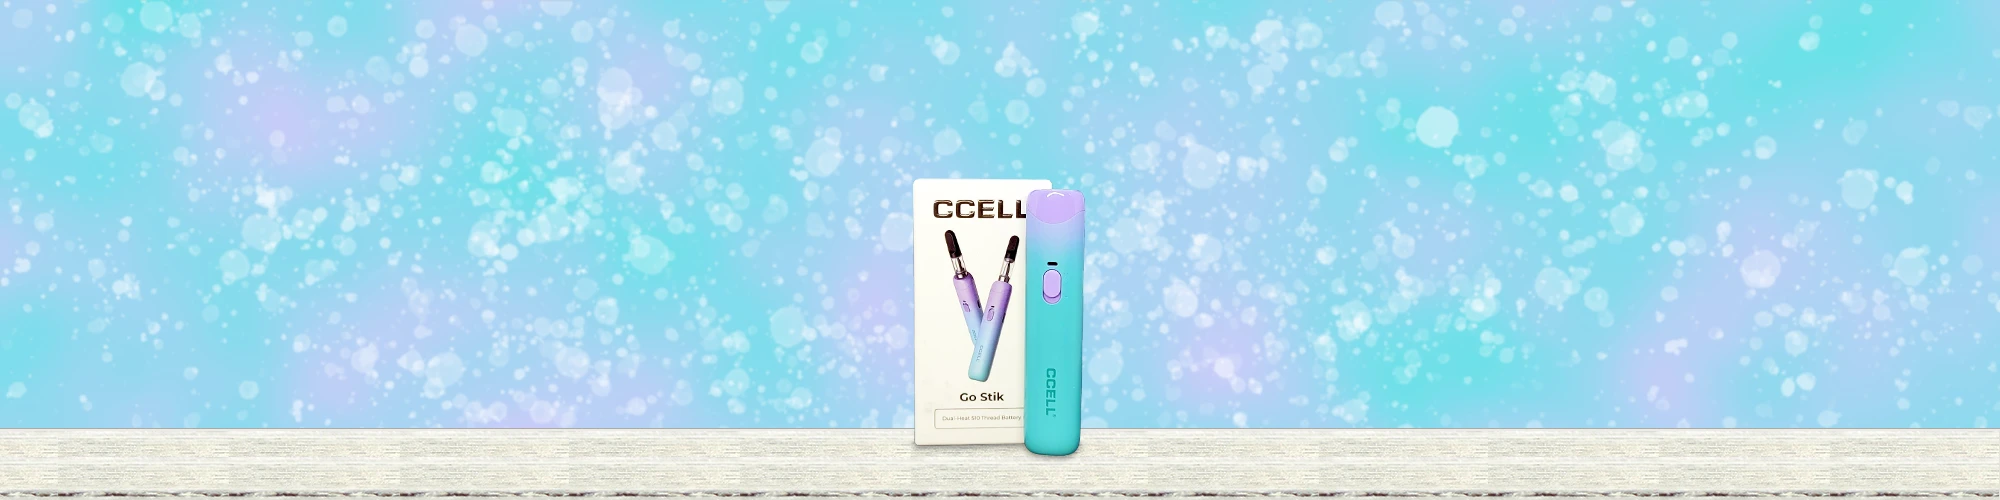 CCELL Go Stik 510 Battery Review Main Banner